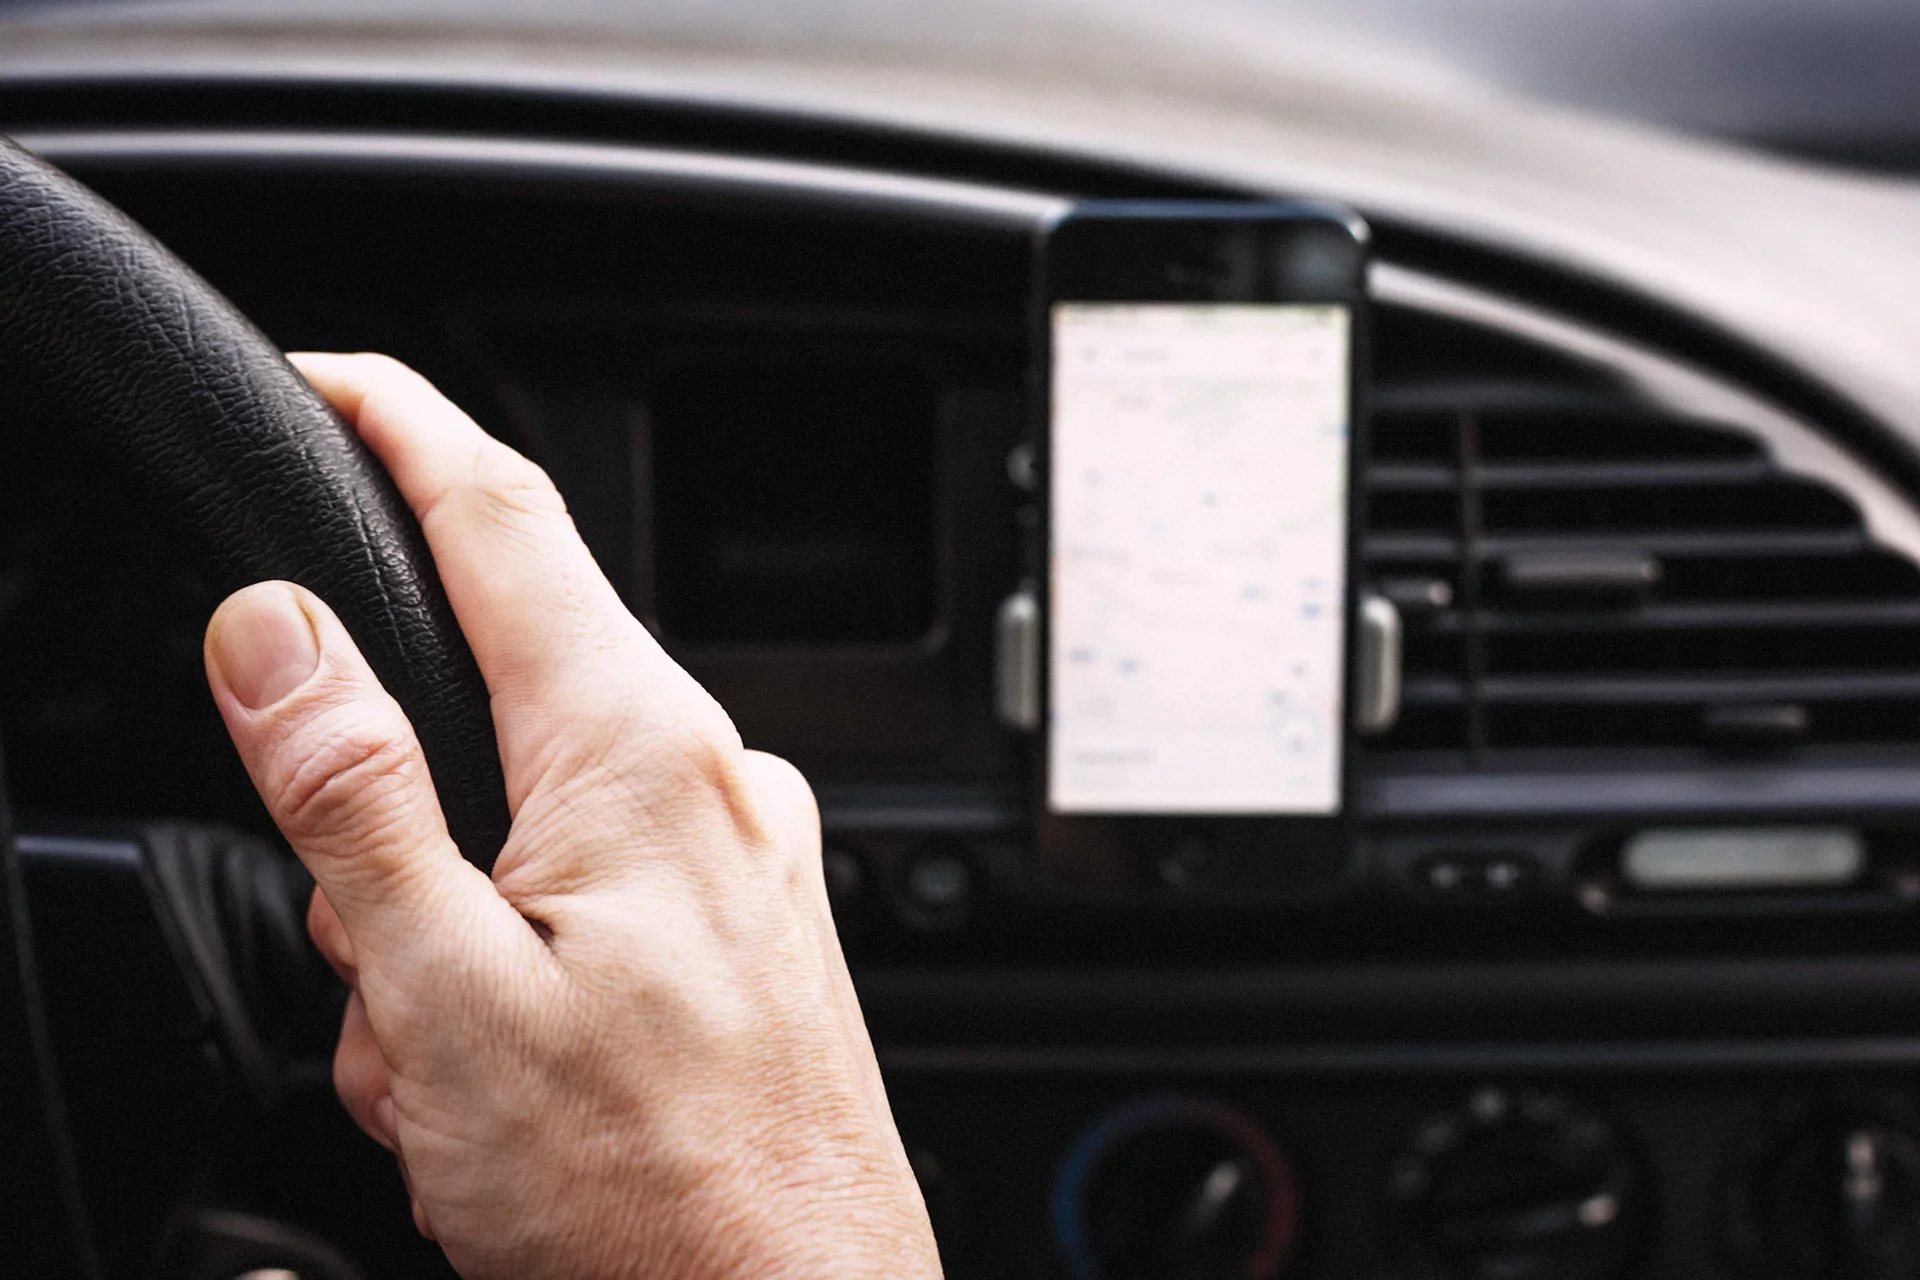 Mobile Telematics: The Game Changer for Insurance Telematics